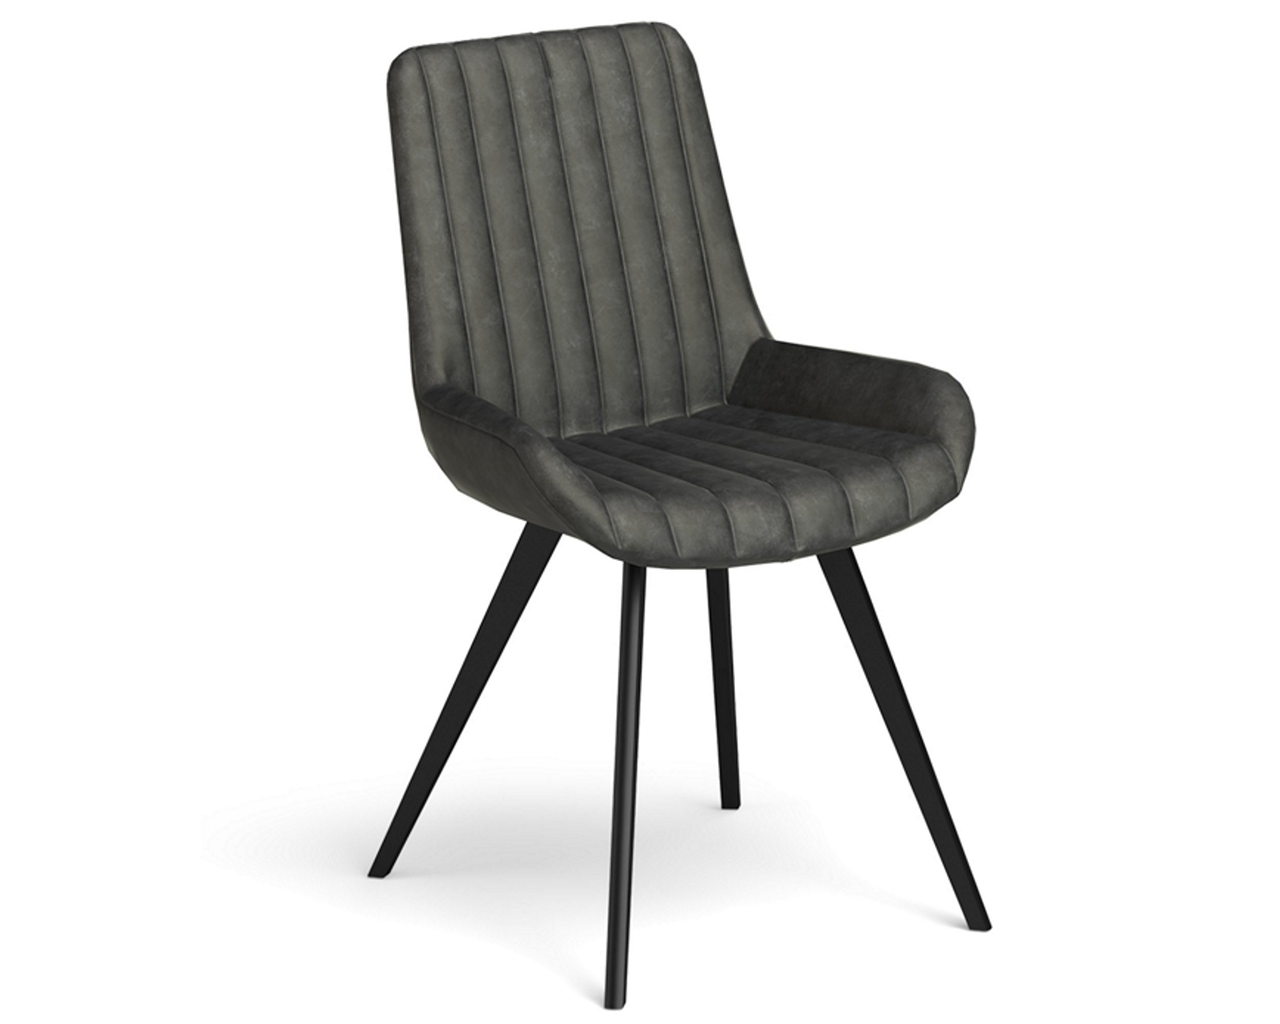 Brooklyn Living and Dining Range - Grey Dining Chairs